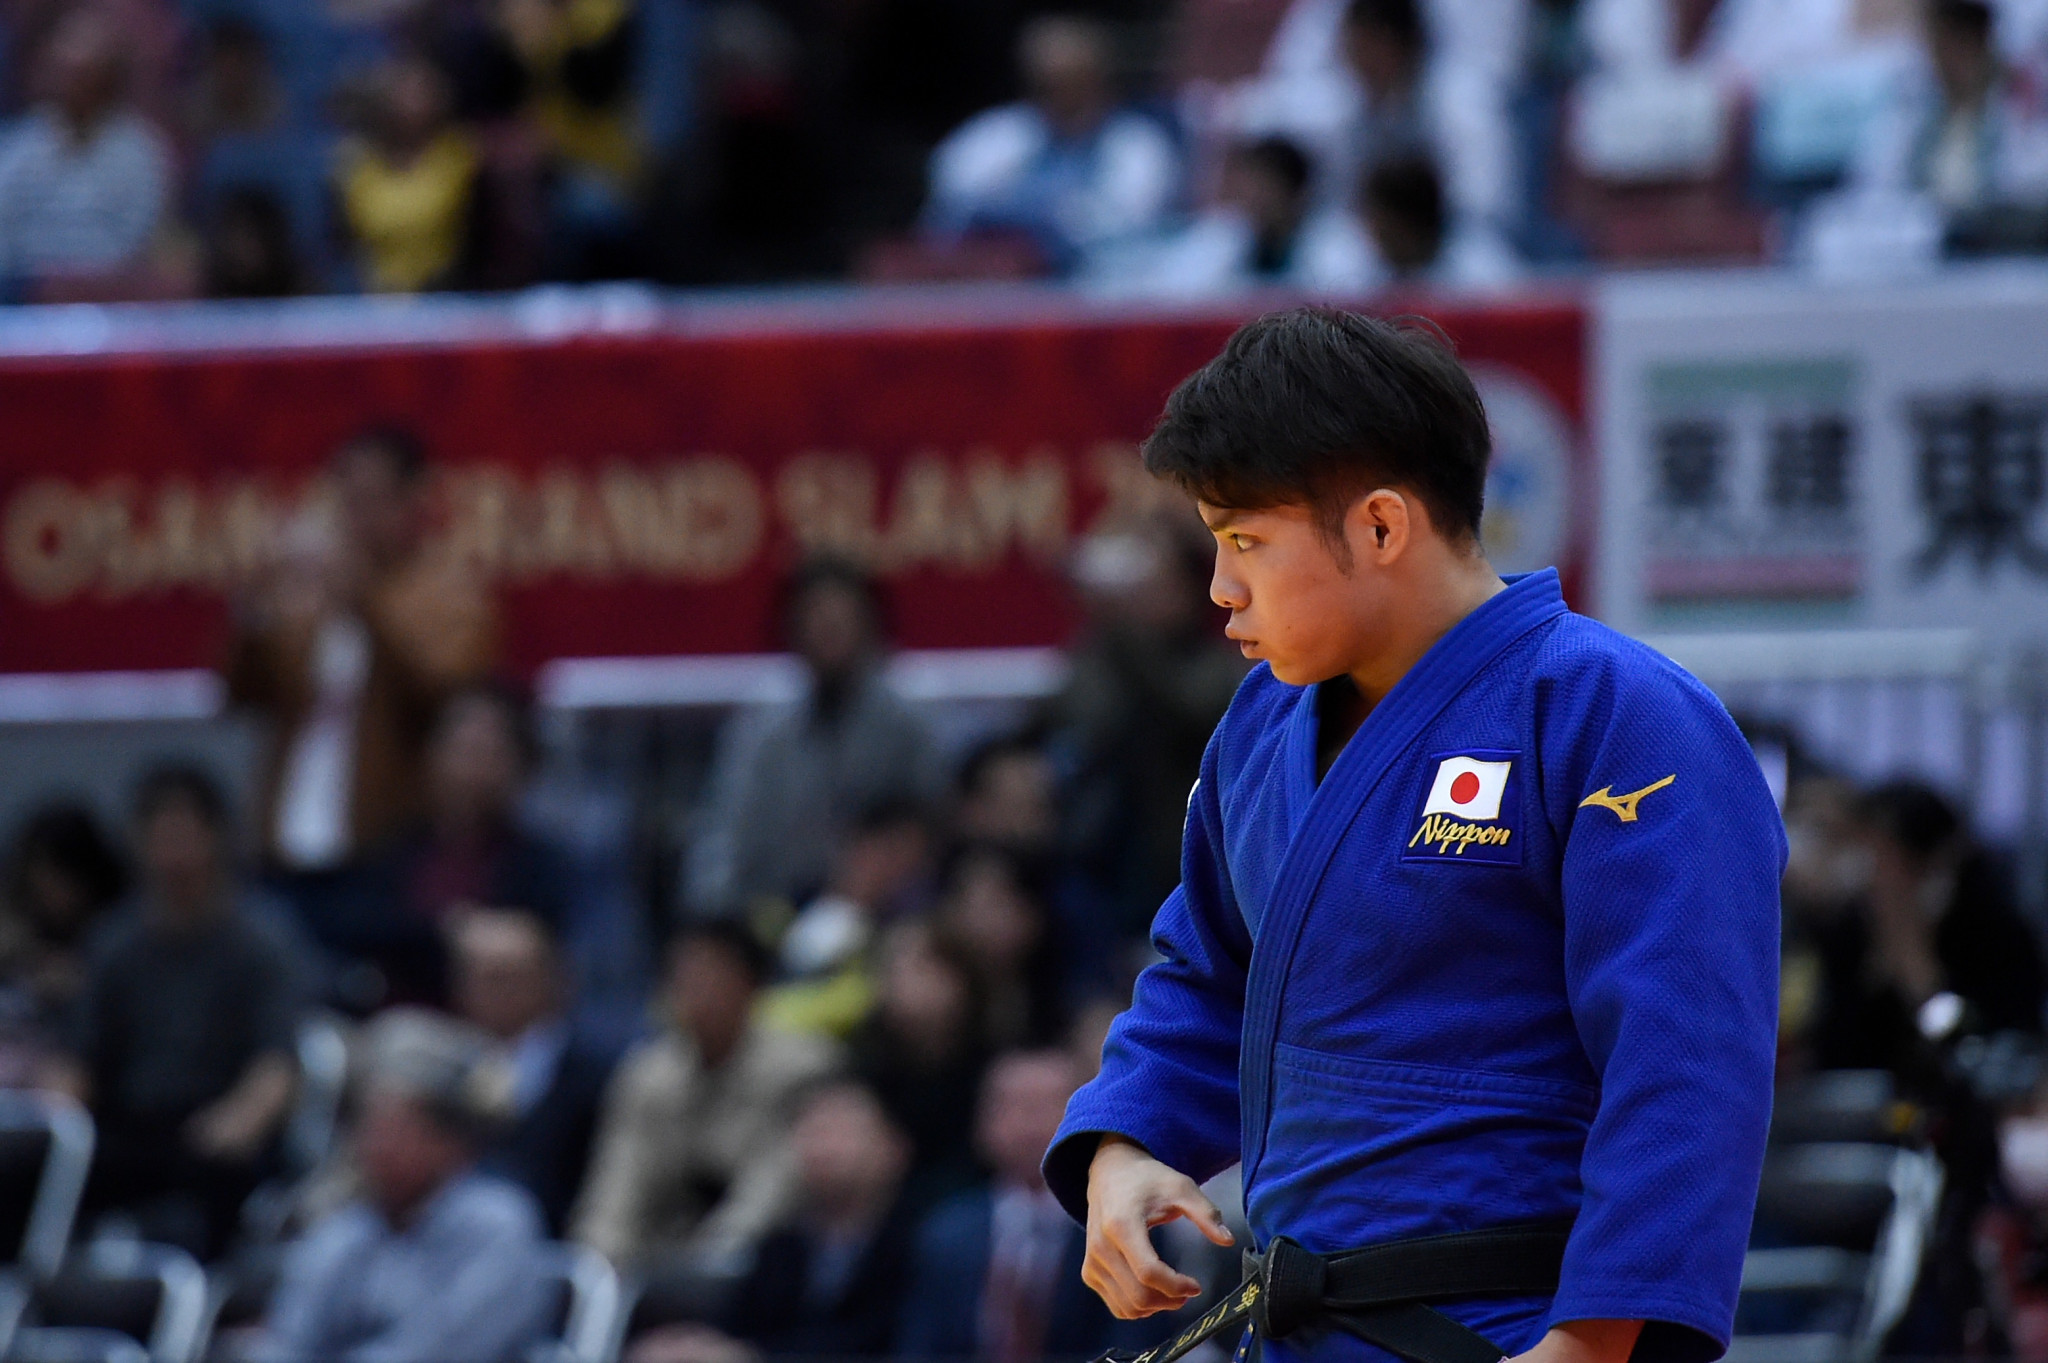 Hifumi Abe completes Japan's judo team for Tokyo 2020 ©Getty Images